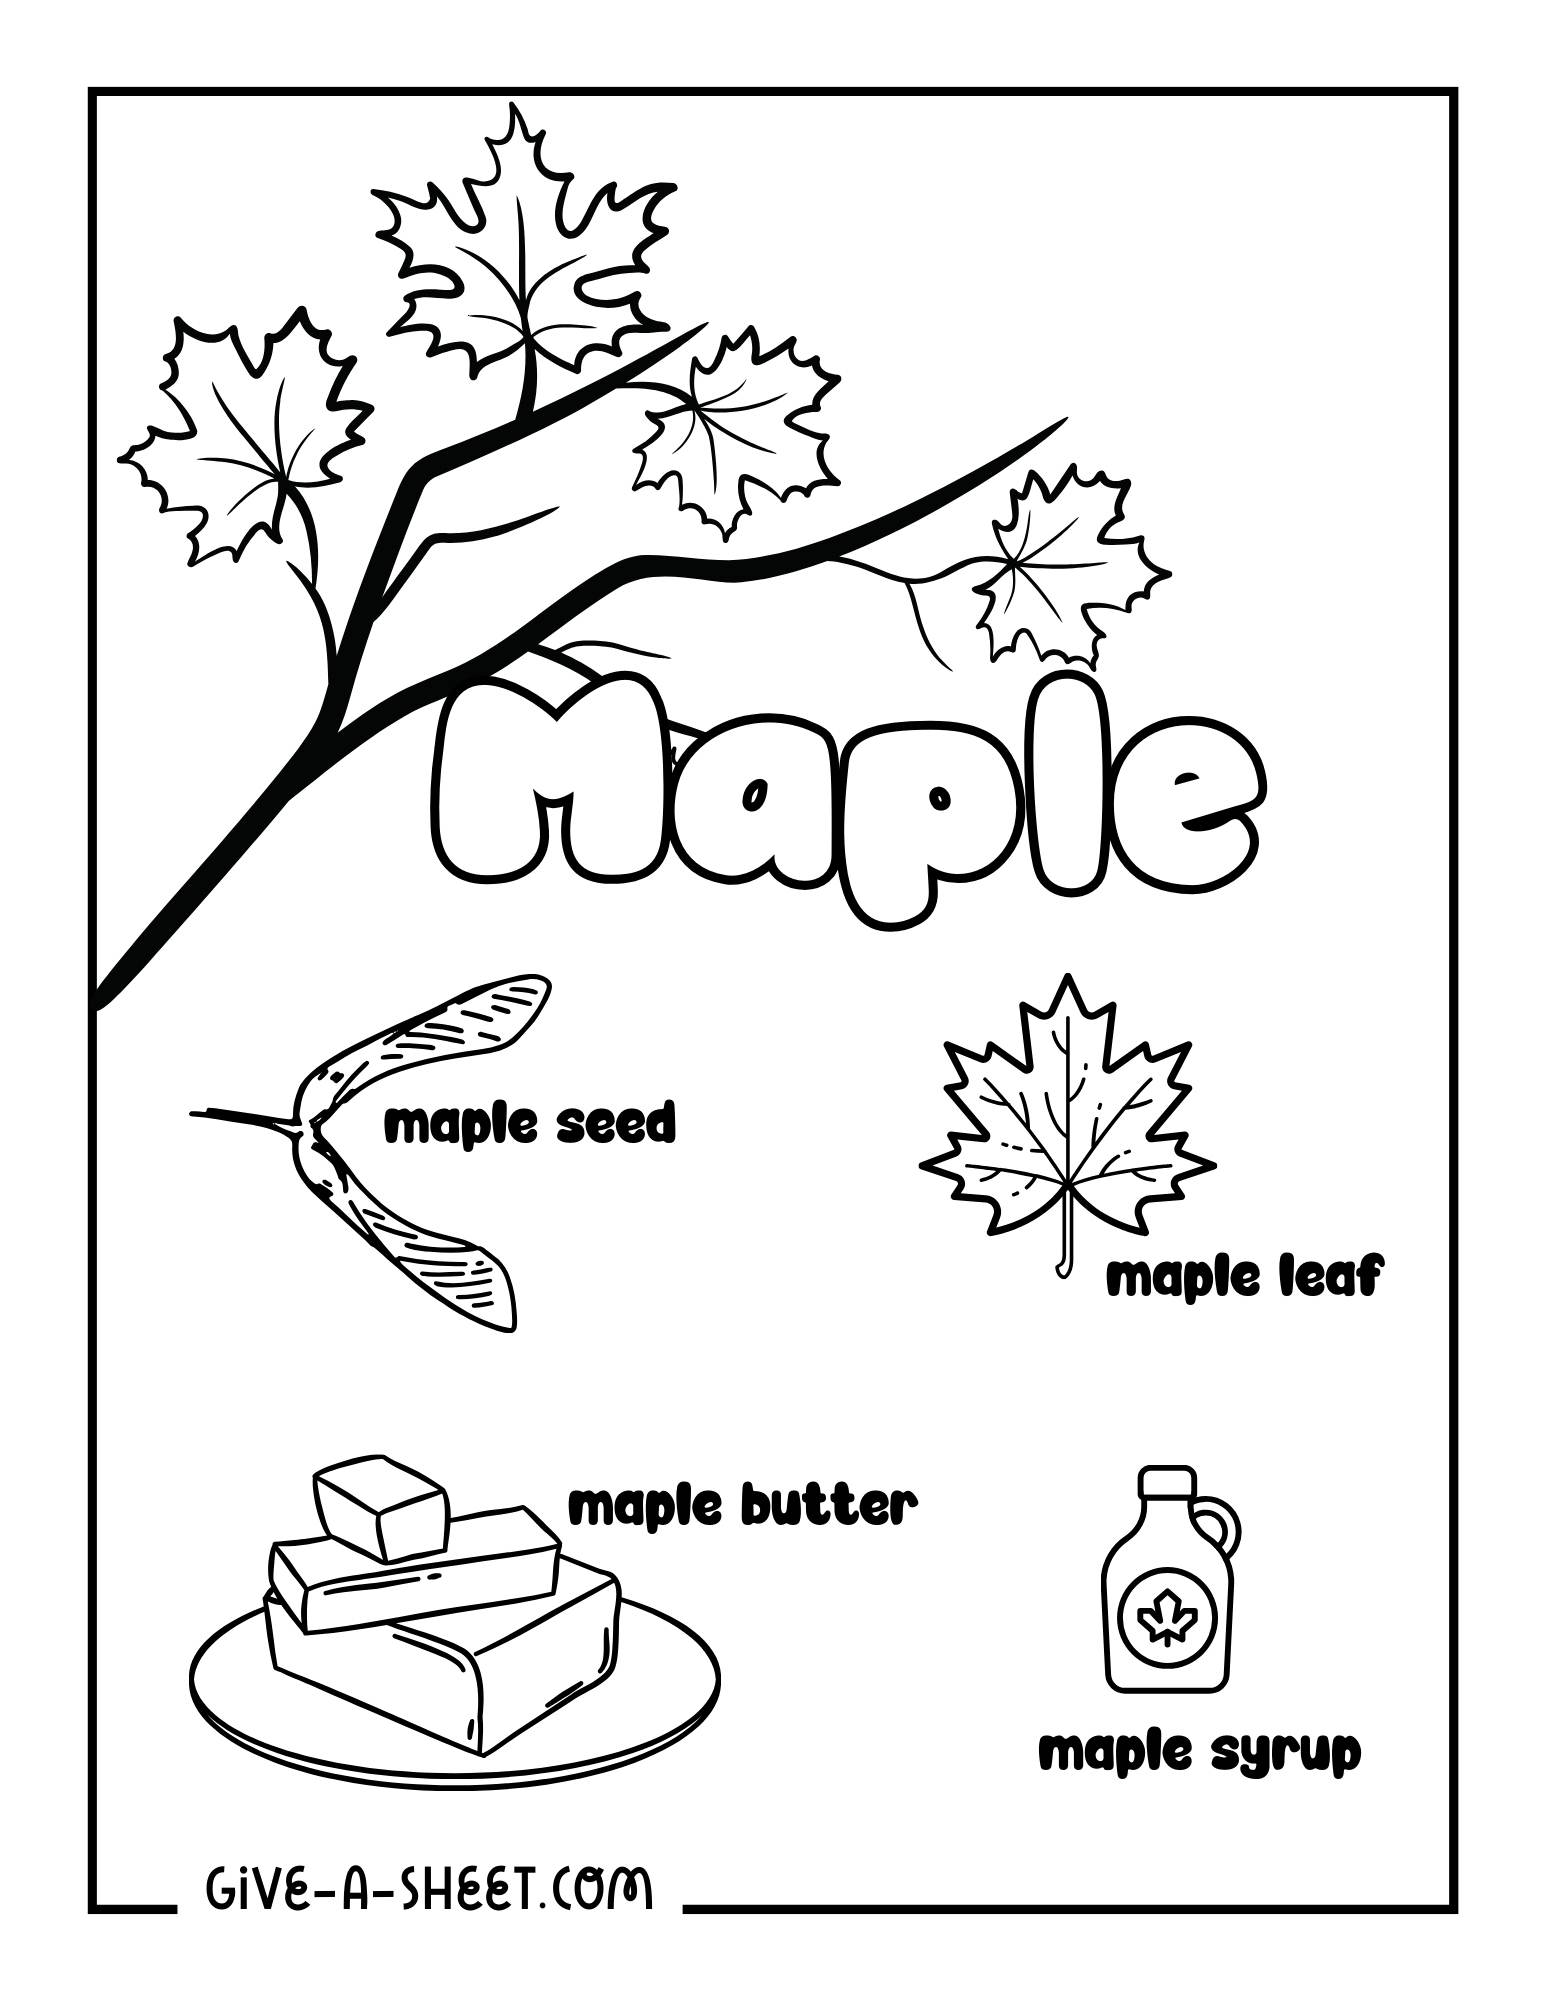 Maple tree coloring page for kids.